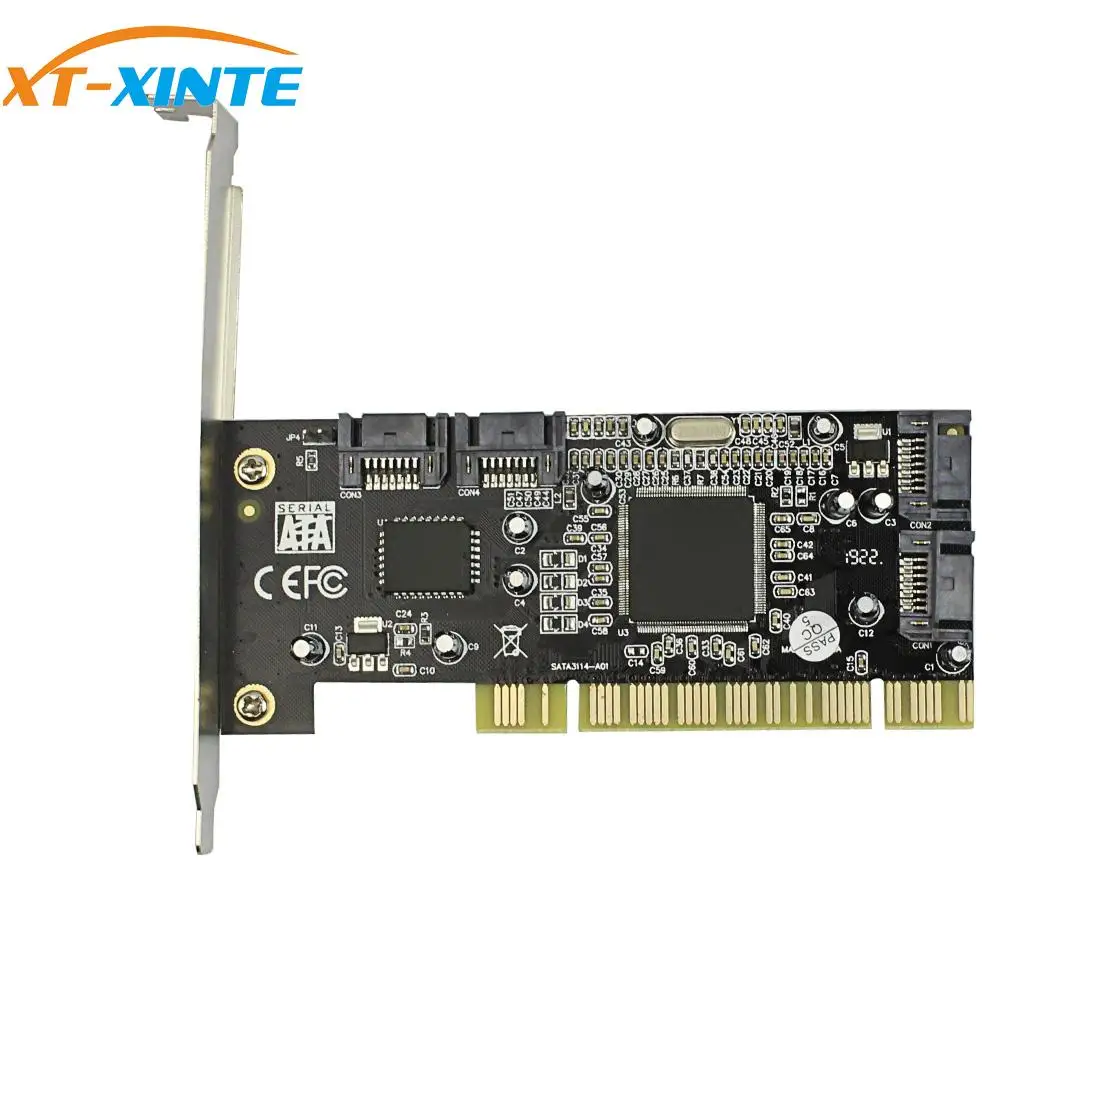 

PCI Expansion Add on Card 4 Ports SATA 1.5Gbps for Sil 3114 Chipset RAID Controller Card for PCI Standard 2.3 Desktop Computer